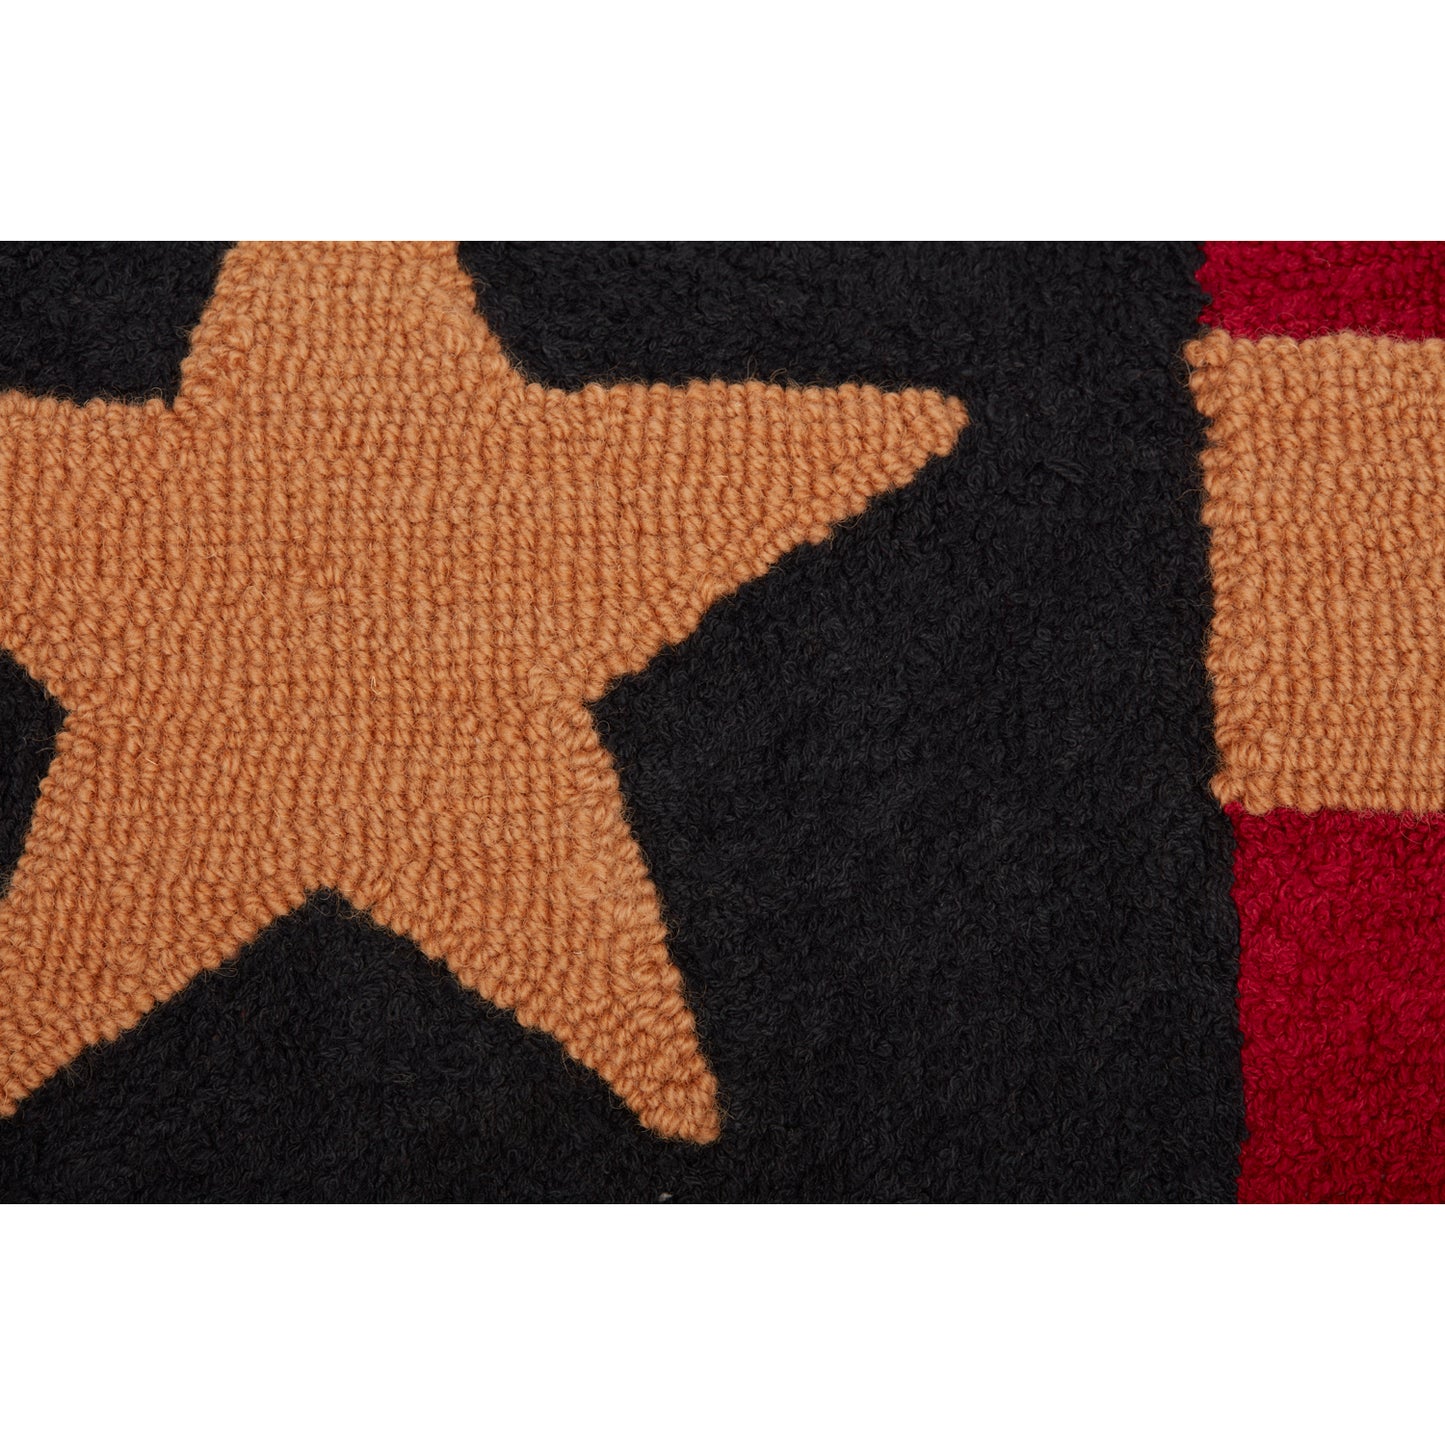 56747-Patriotic-Patch-Flag-Hooked-Pillow-14x22-image-6